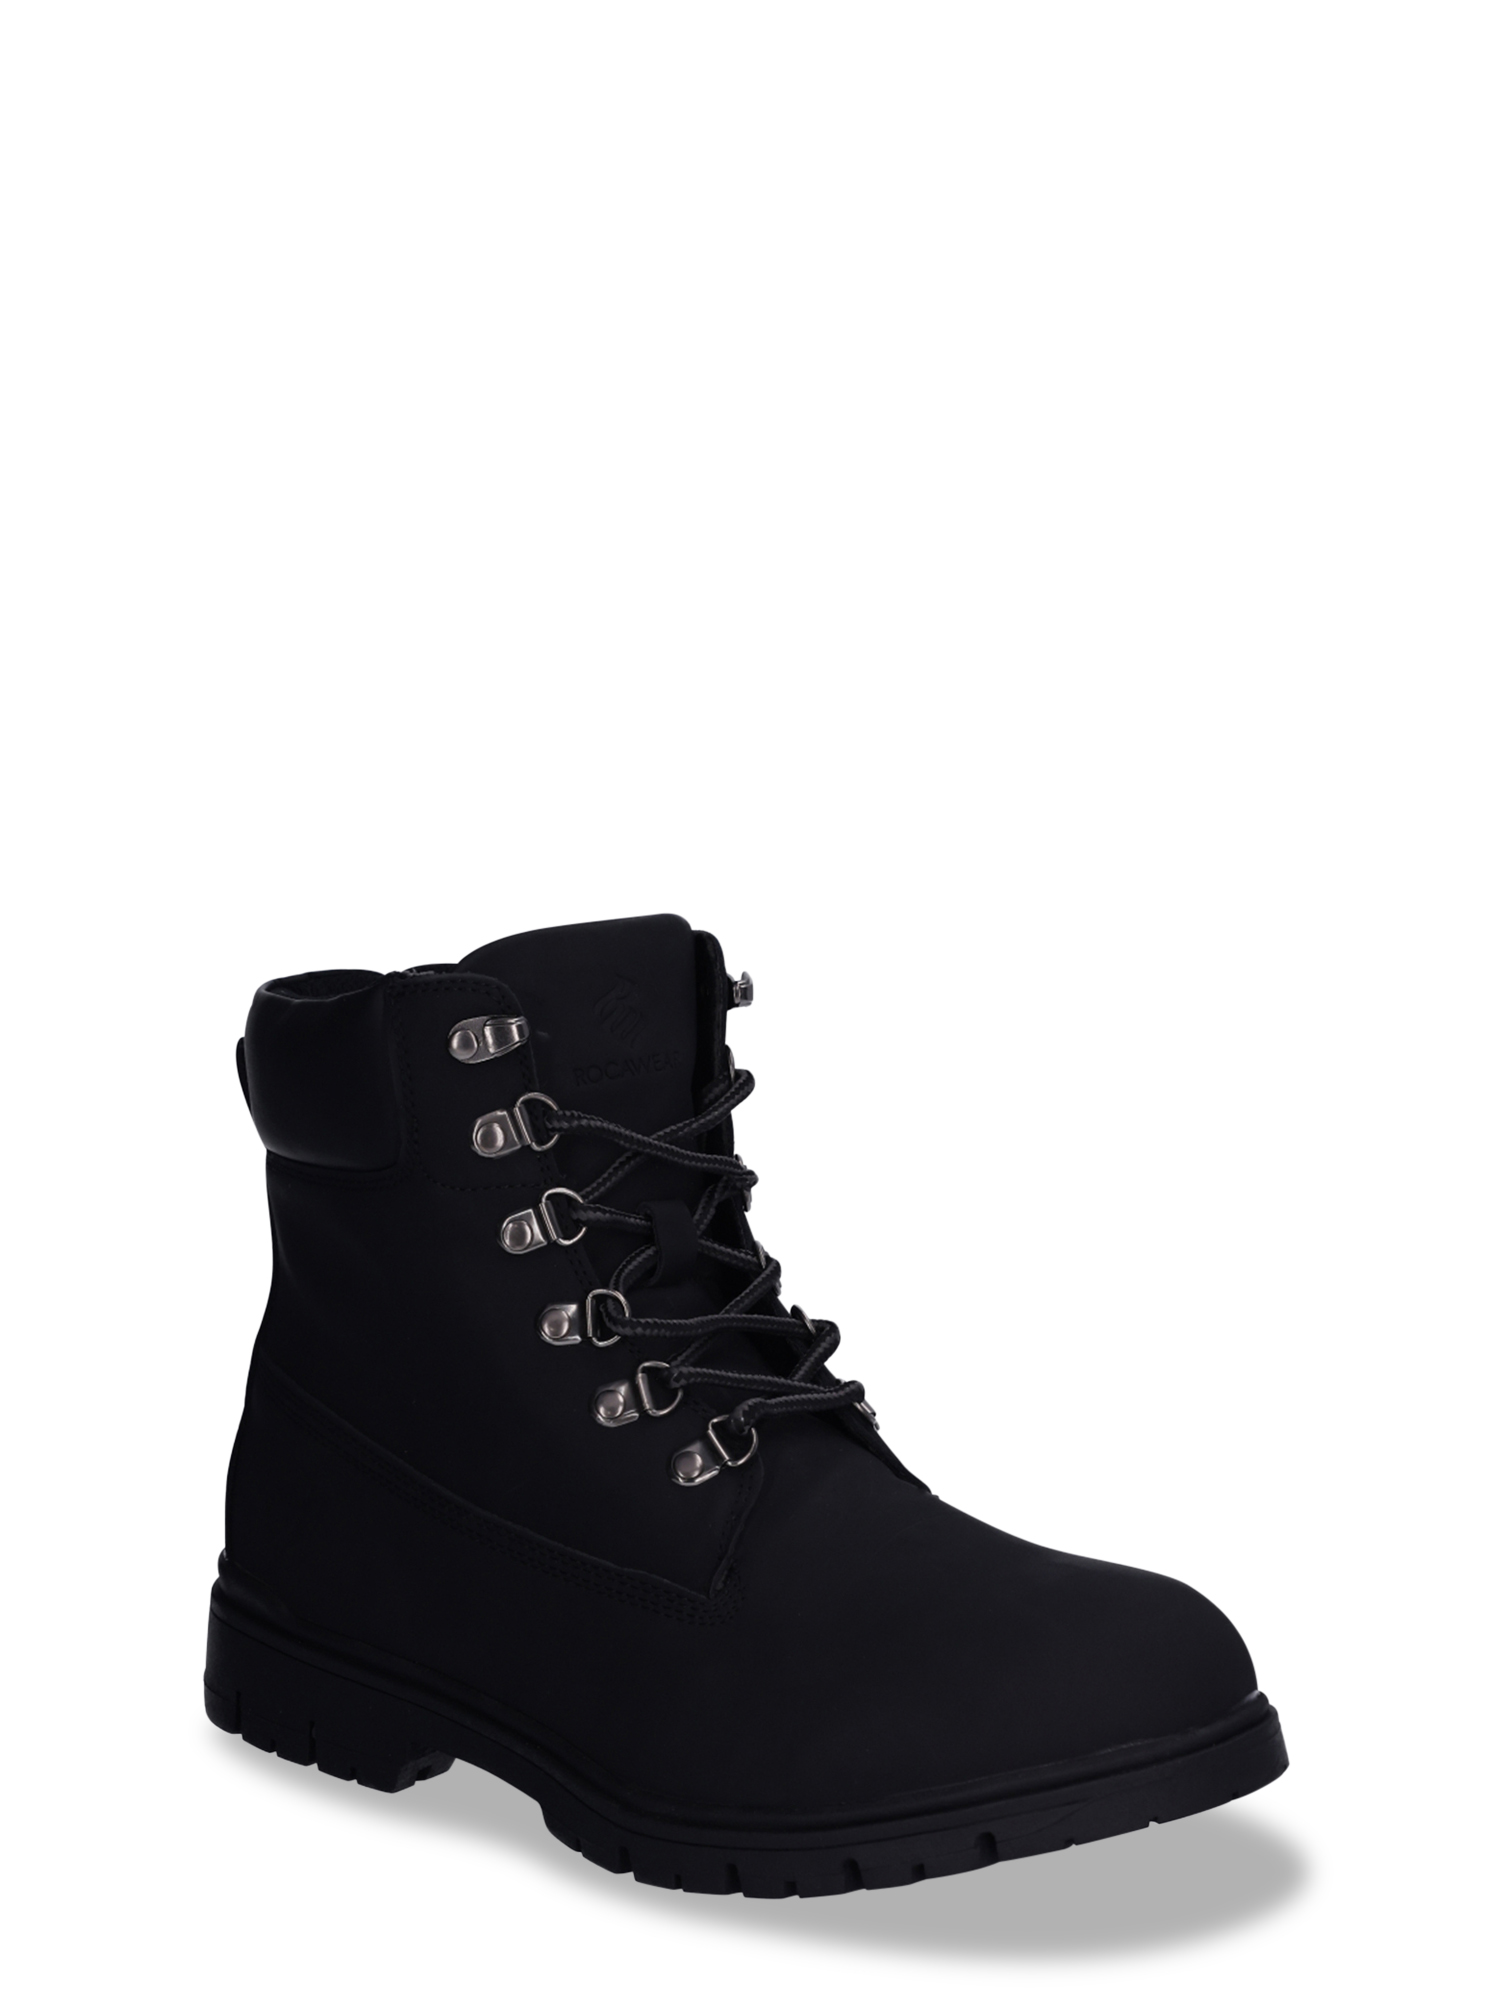 Rocawear Men's Austin Lace Up Boots - image 1 of 5